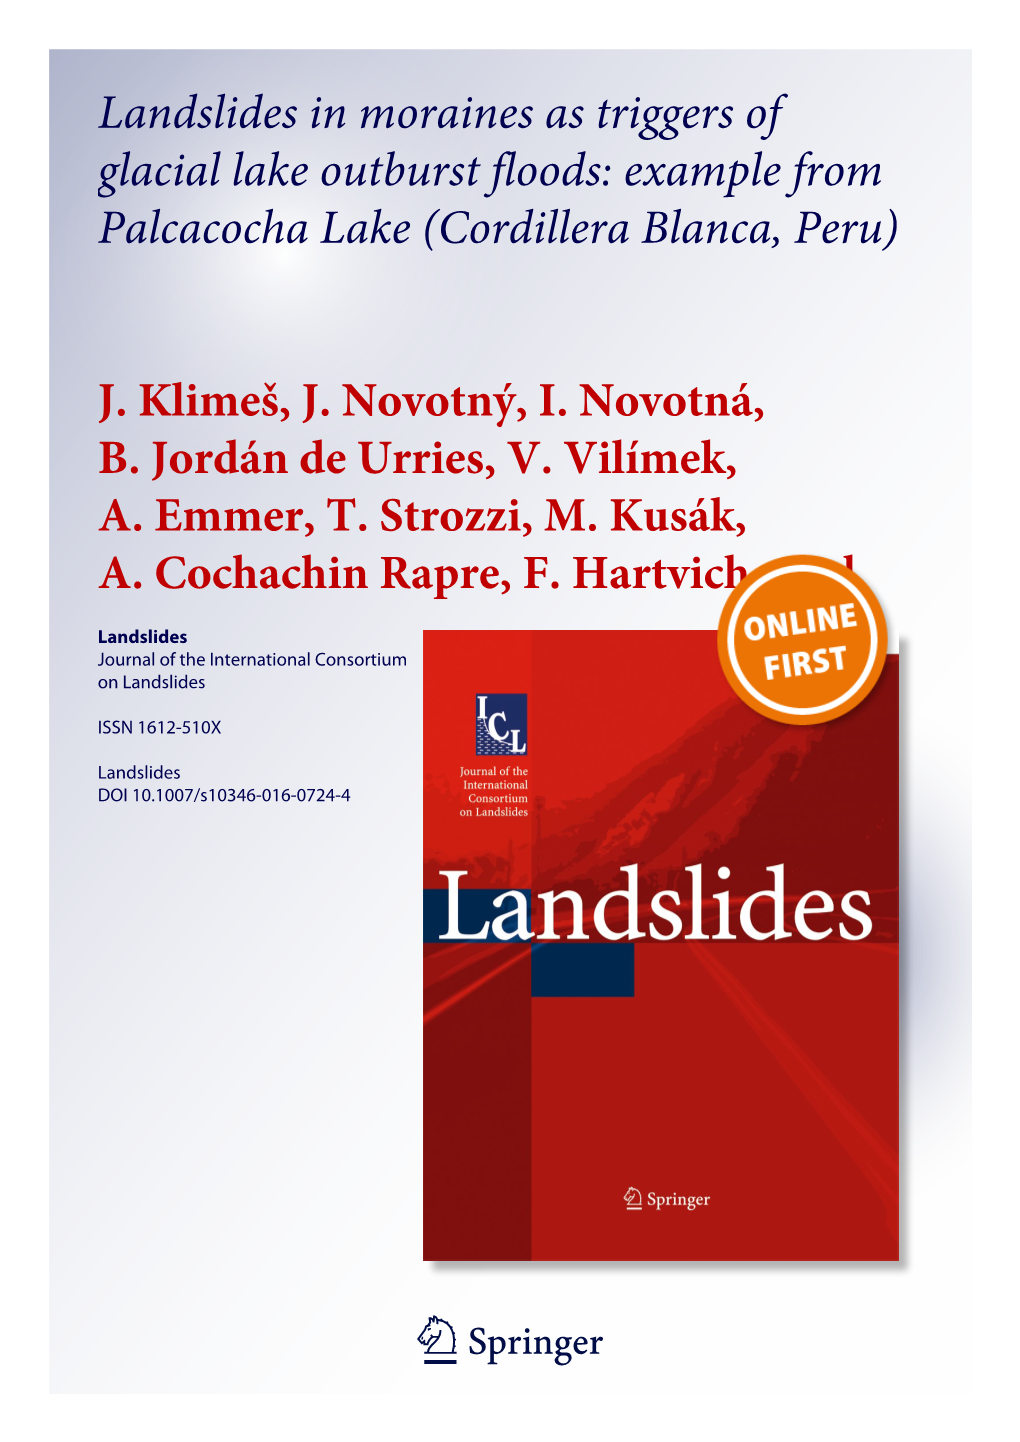 Landslides in Moraines As Triggers of Glacial Lake Outburst Floods: Example from Palcacocha Lake (Cordillera Blanca, Peru)